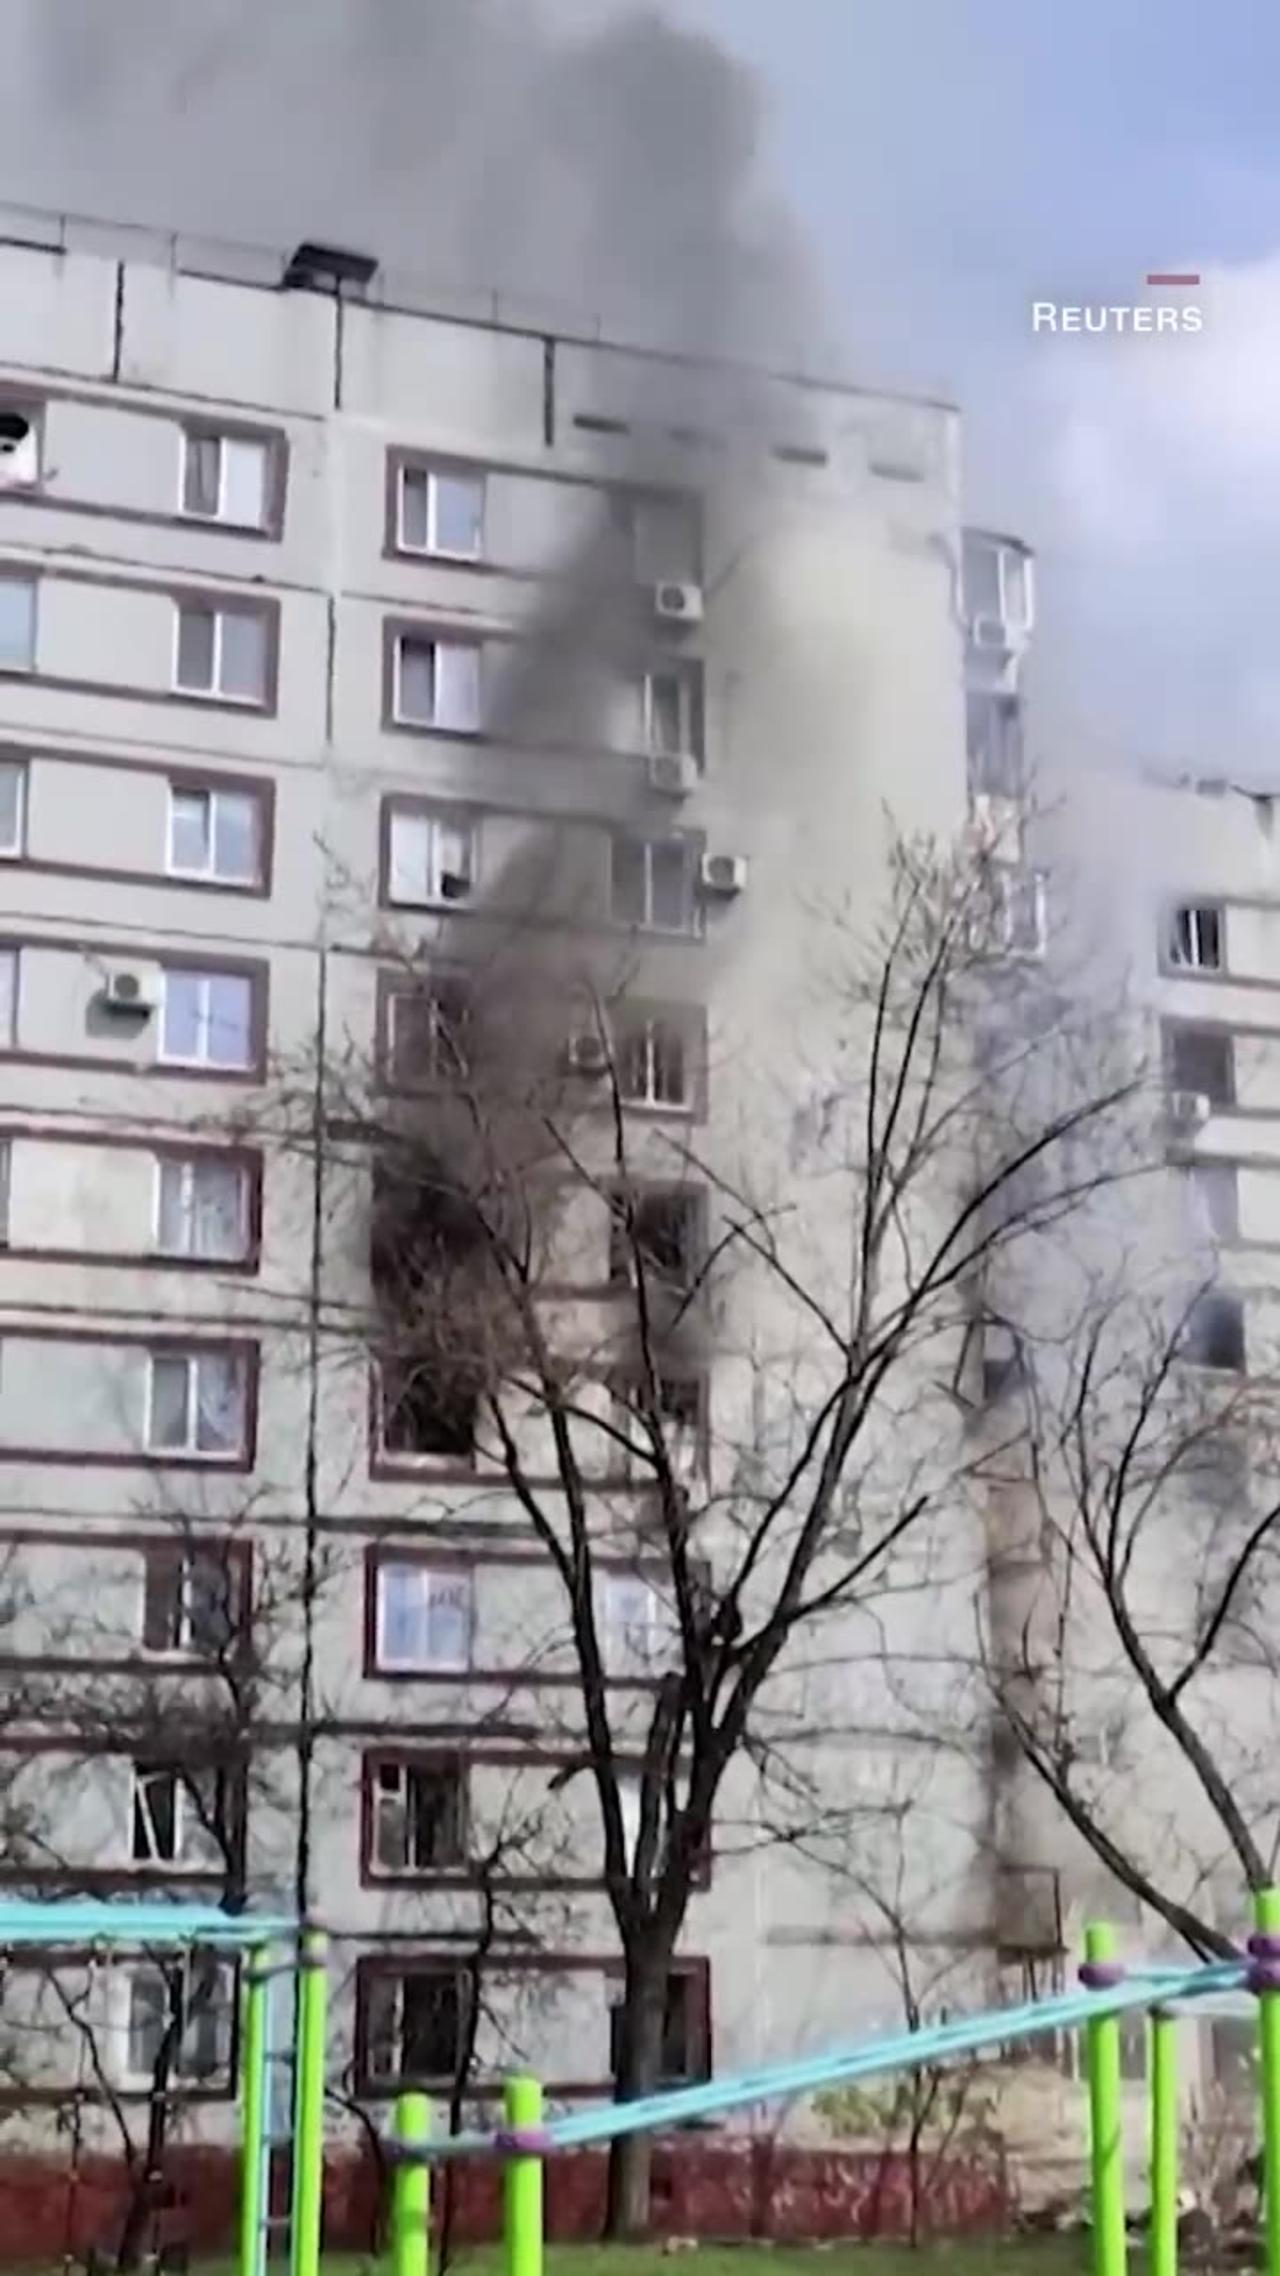 Video shows Russian missile strike on apartment building